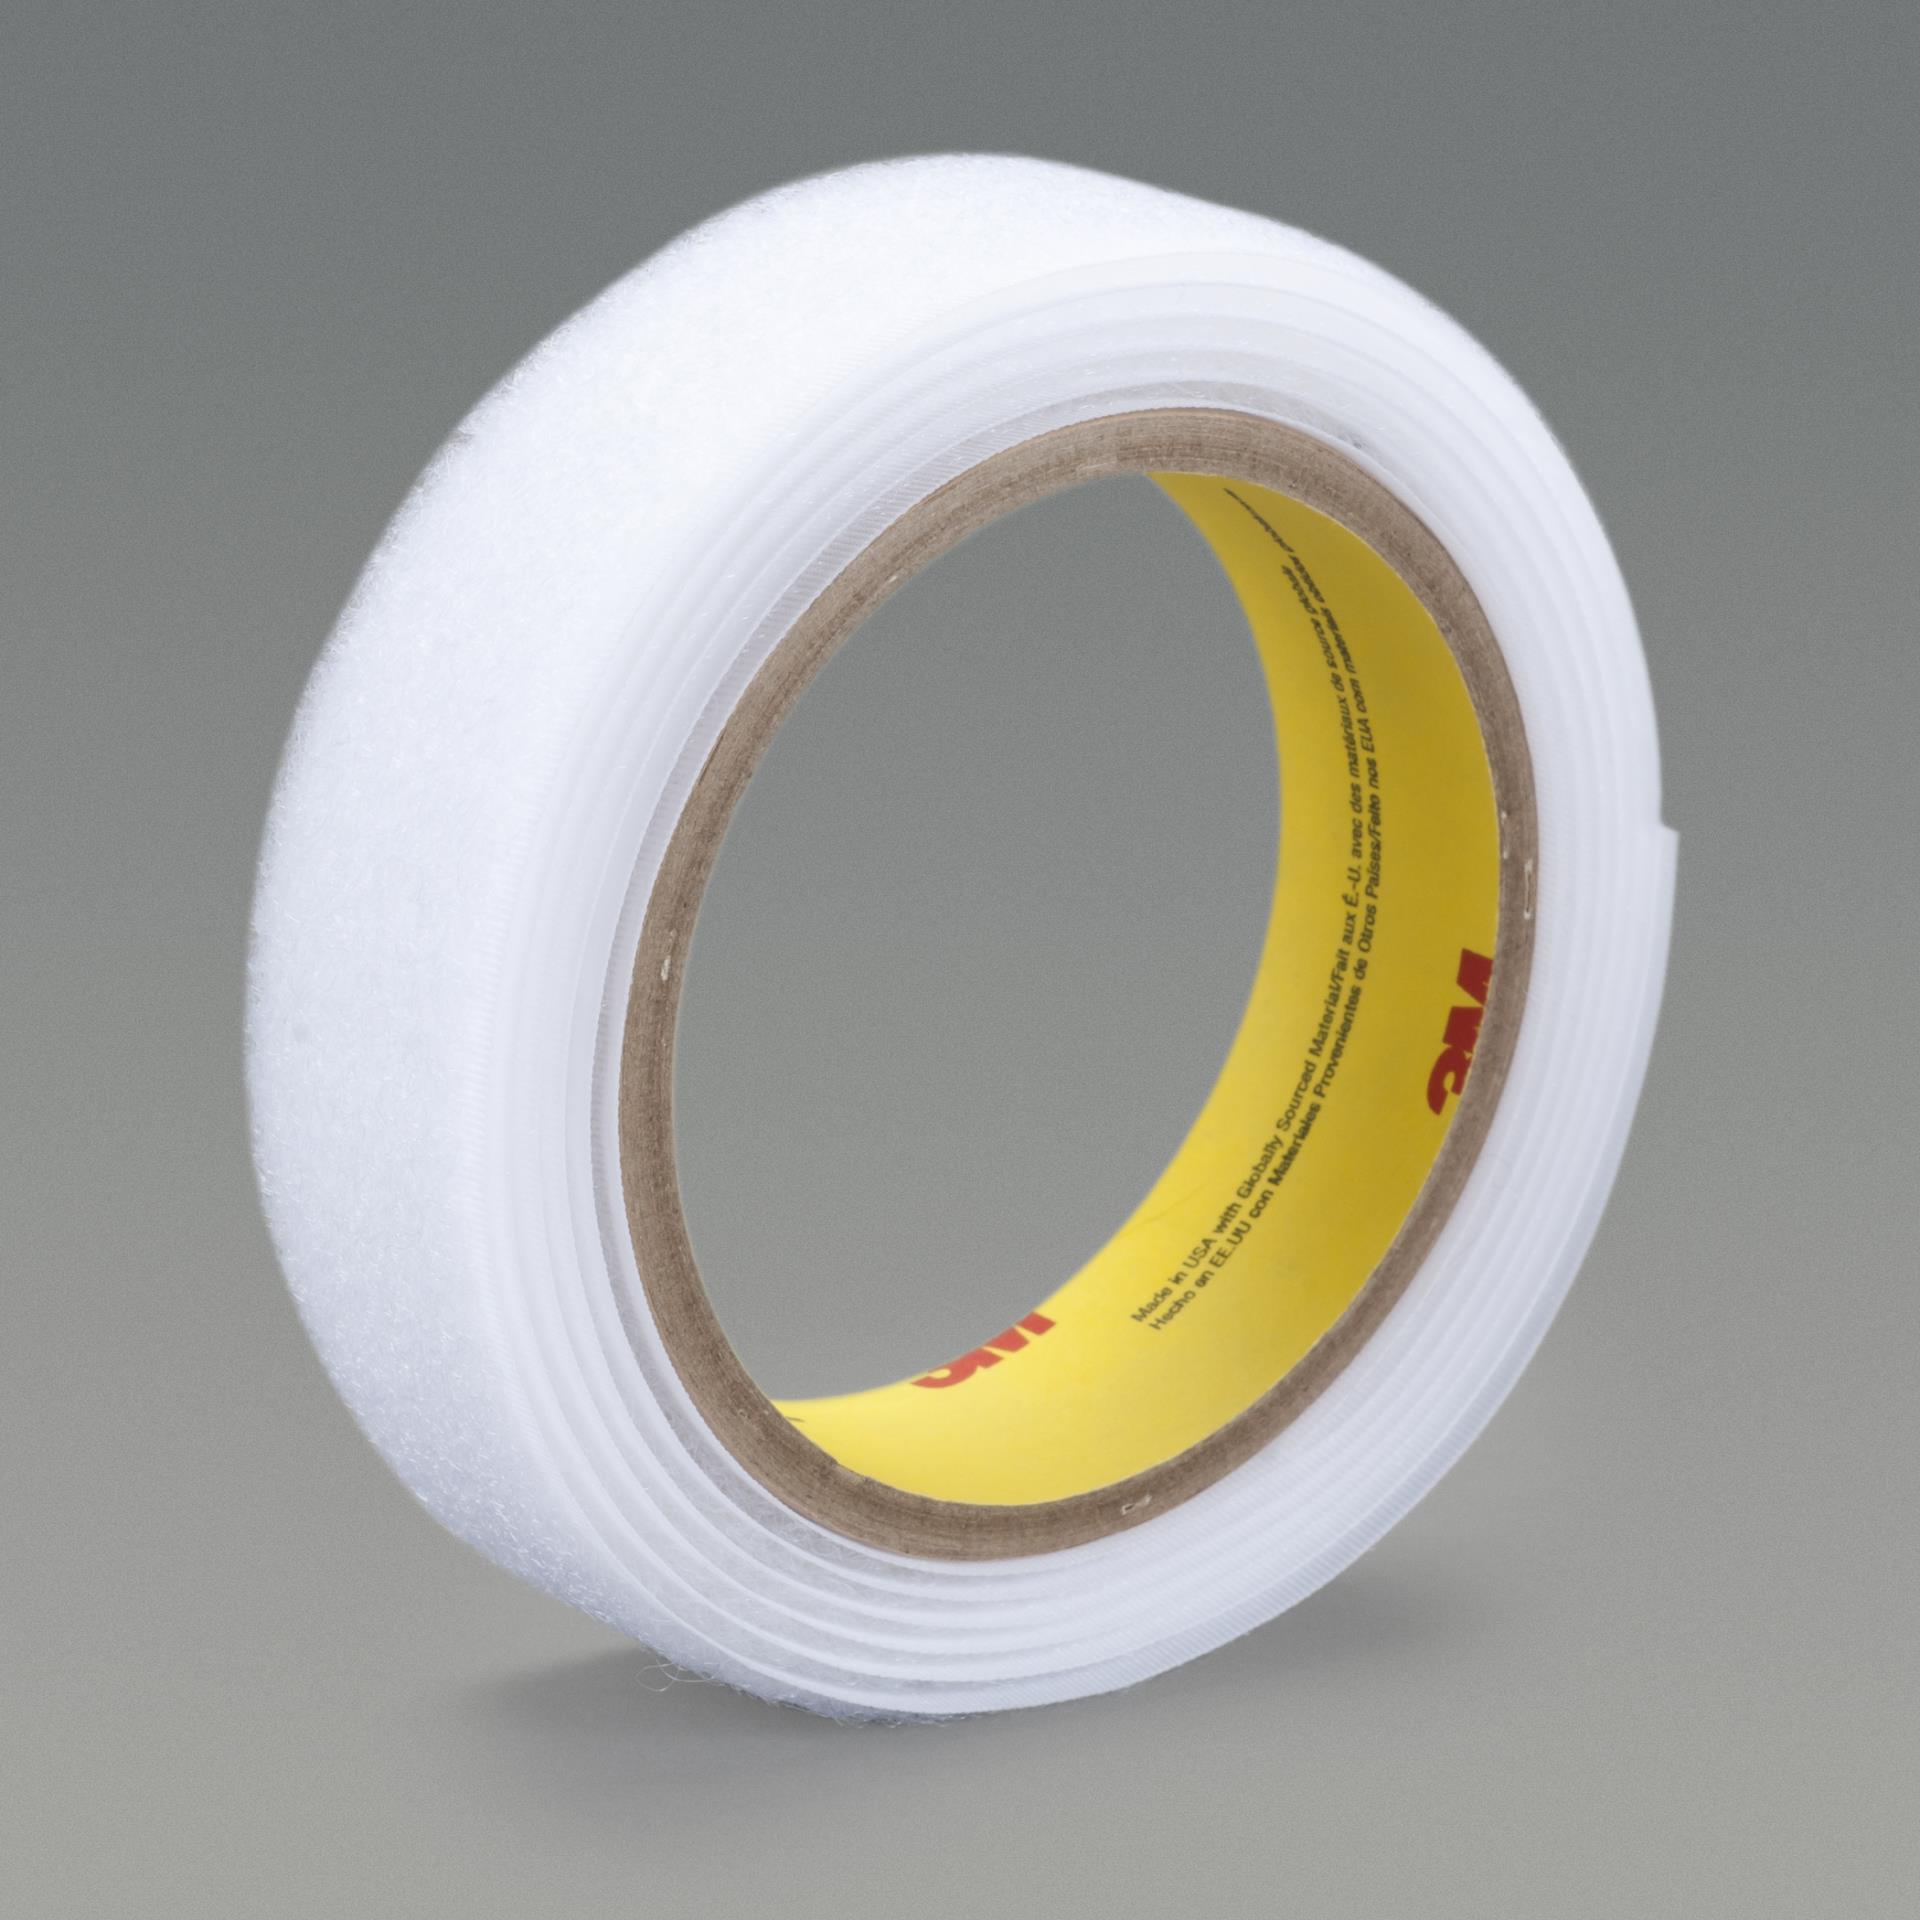 3M™ Yellow Super Weatherstrip and Gasket Adhesive